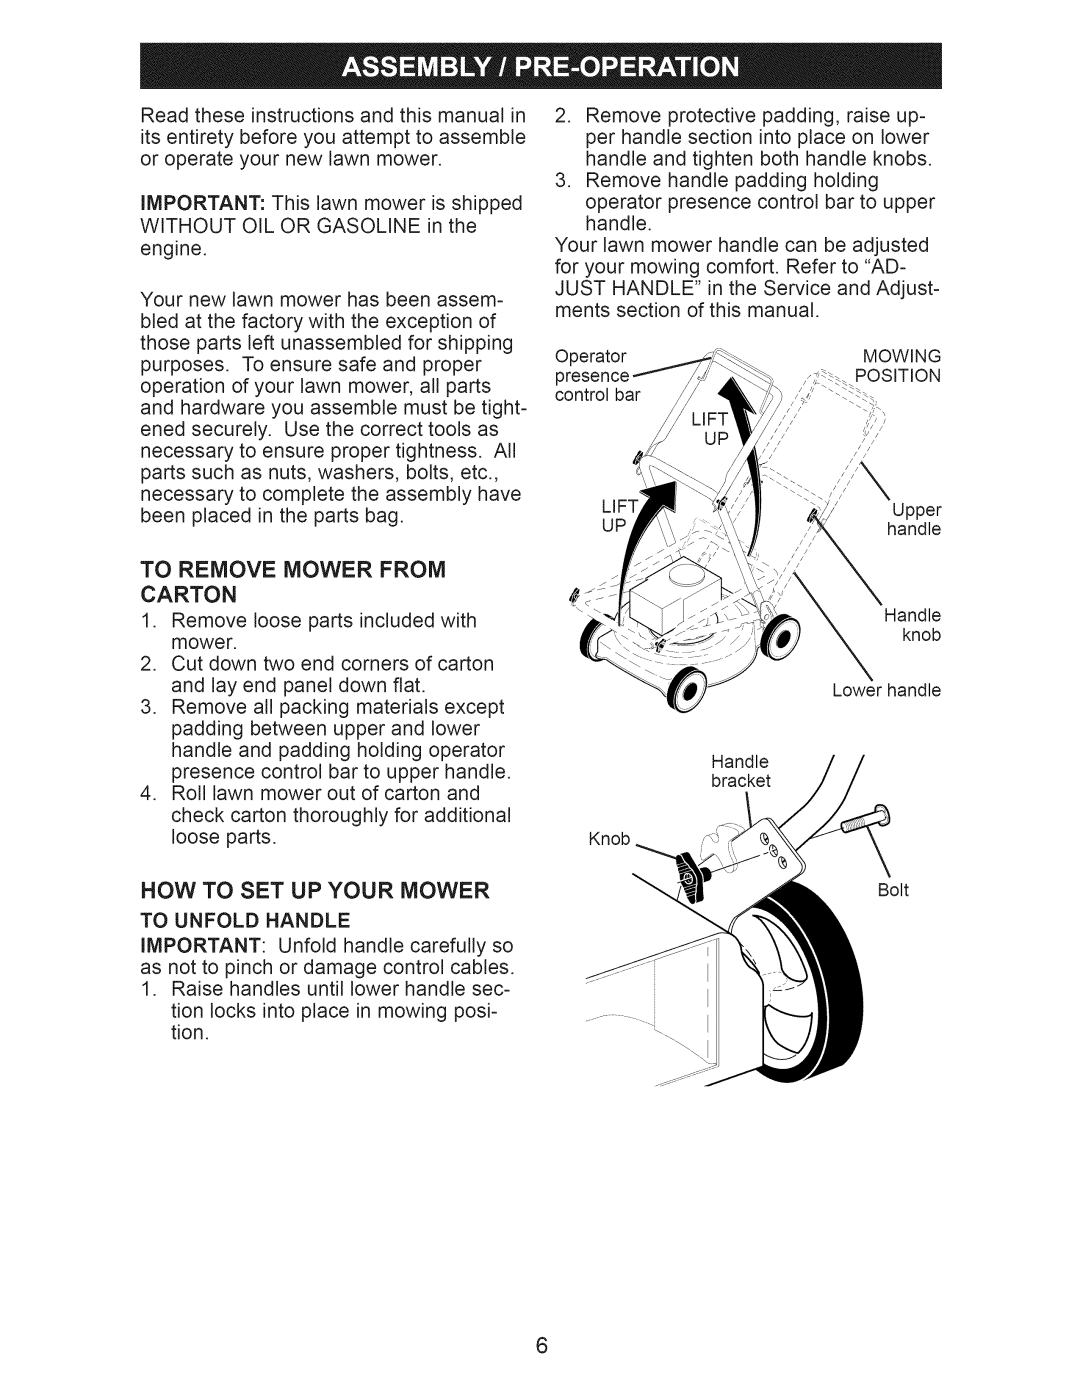 Craftsman 917.376530 owner manual Now To Set Up Your Mower, To Remove Mower From Carton 